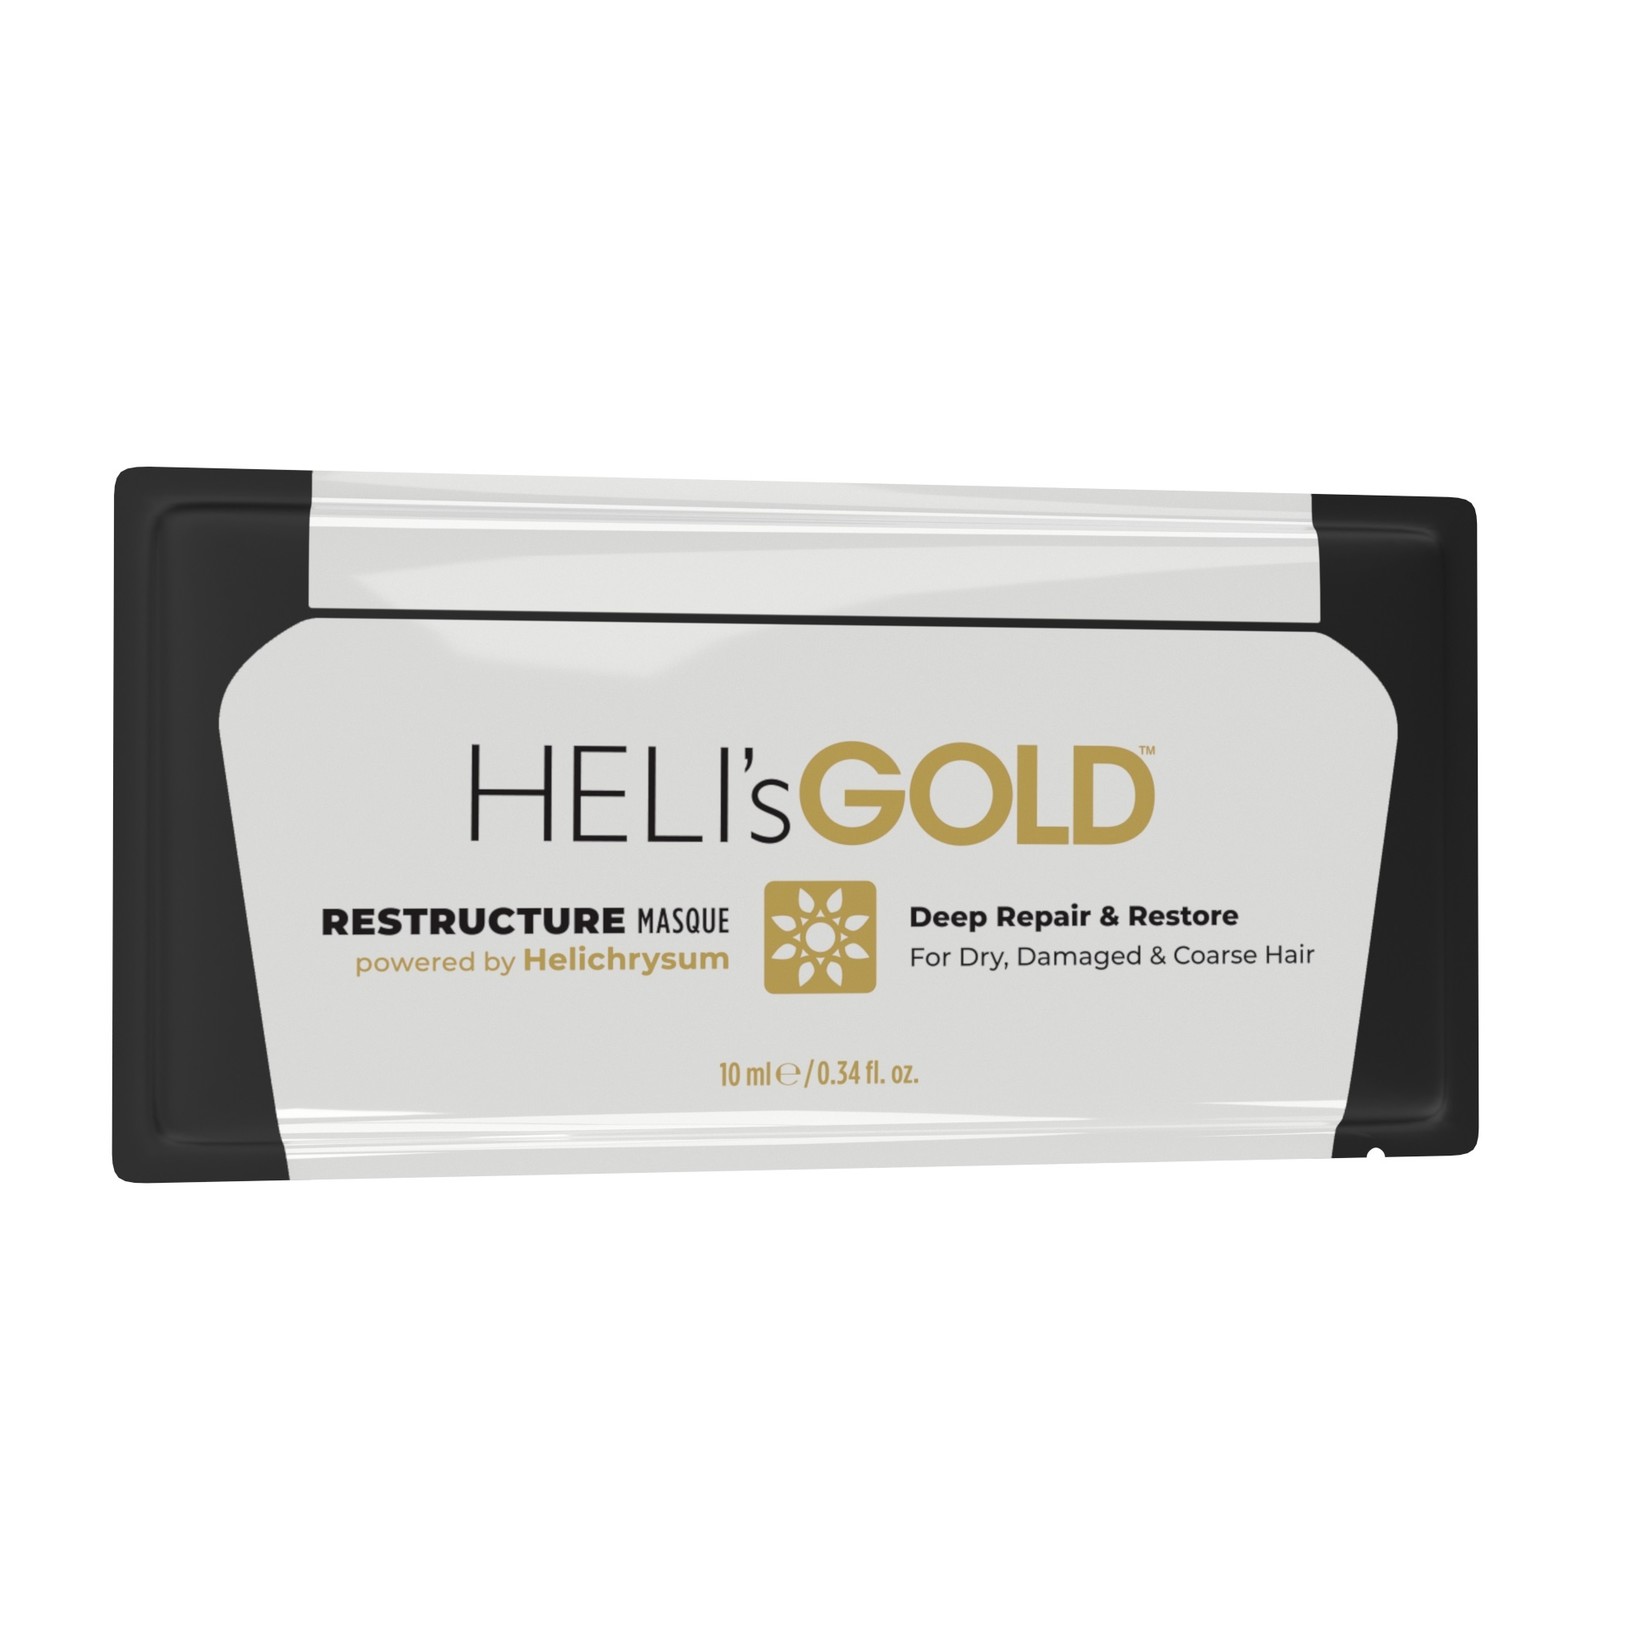 Heli's Gold Restructure Masque Packet 10 ml